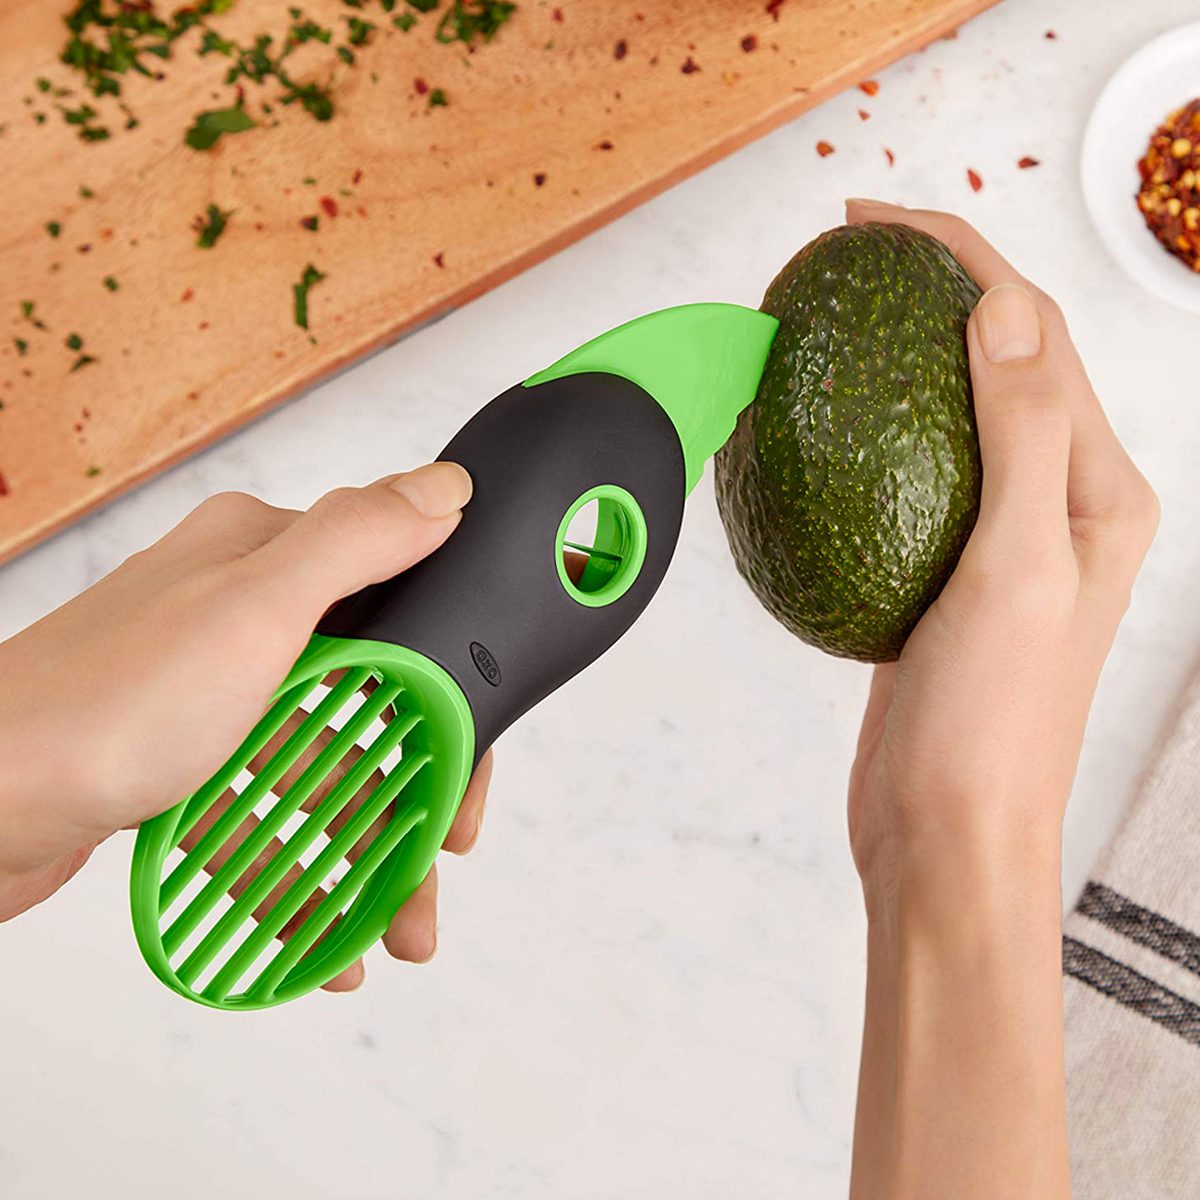 3 Must-Have Kitchen Tools for Fast and Efficient Meal Prep for Busy People  - Chop Happy